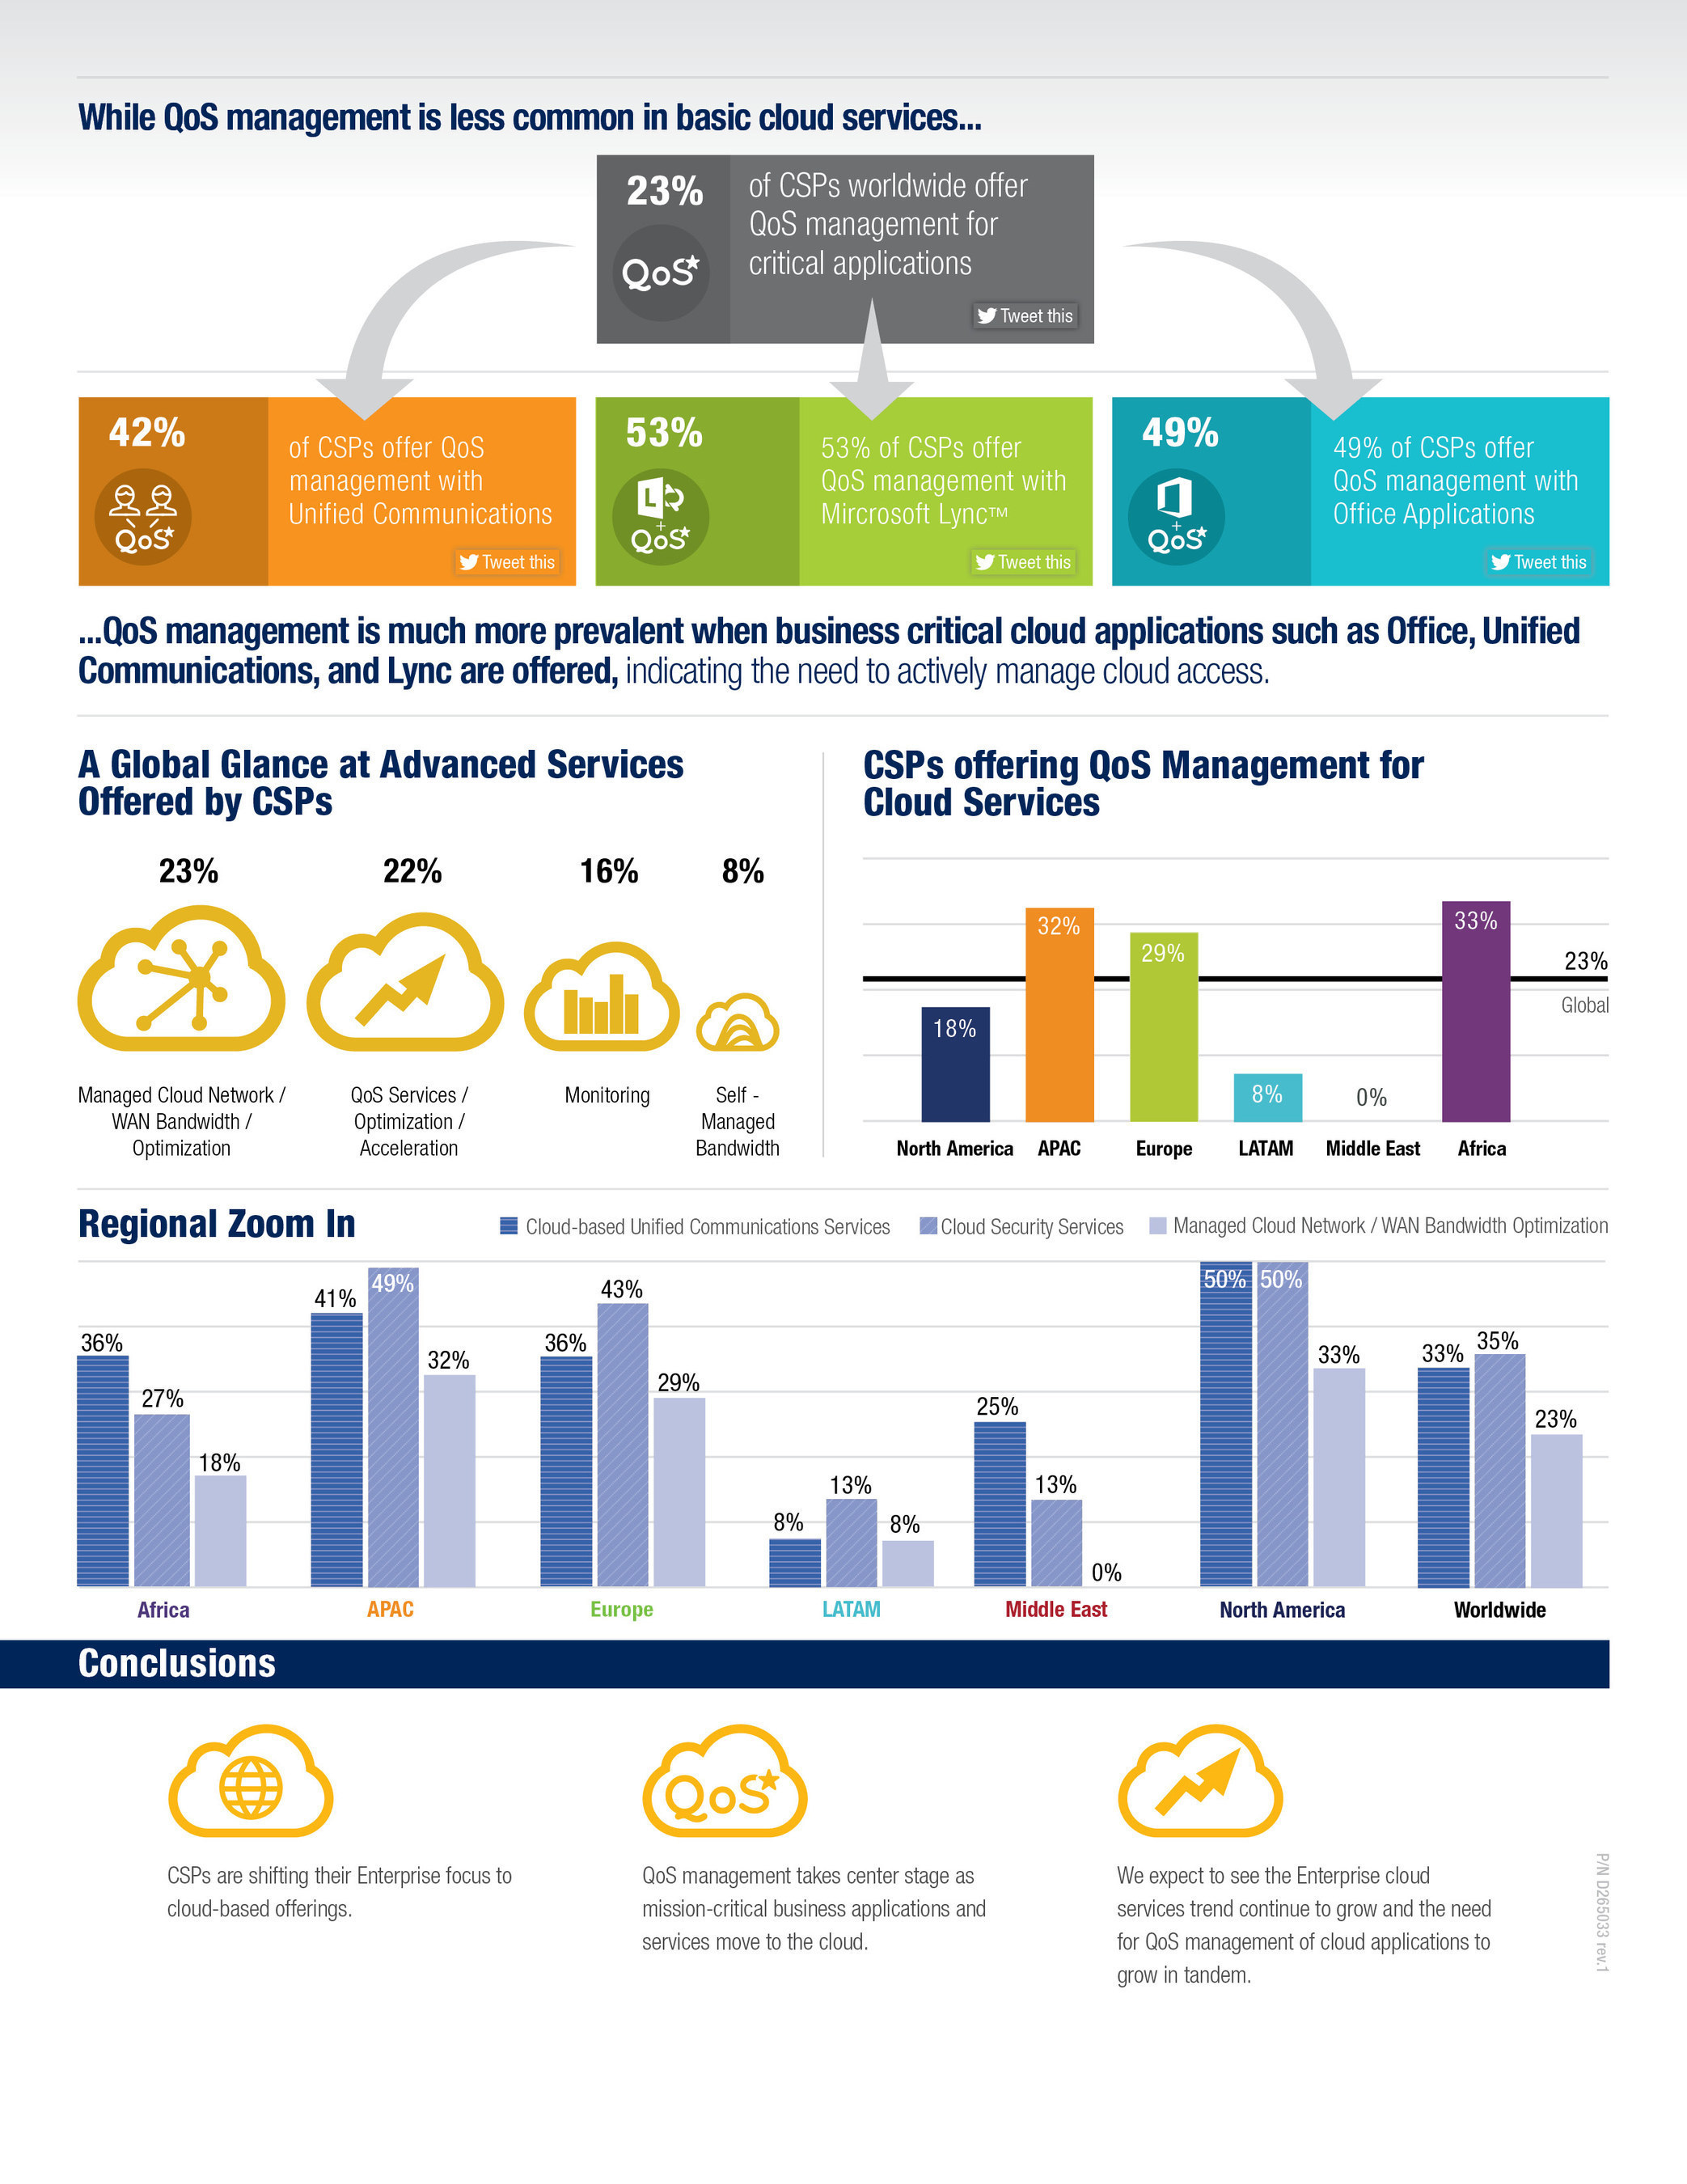 Allot CloudTrends Report Finds CSPs are Leveraging the Experience of Cloud Applications like Microsoft Office 365 and Lync